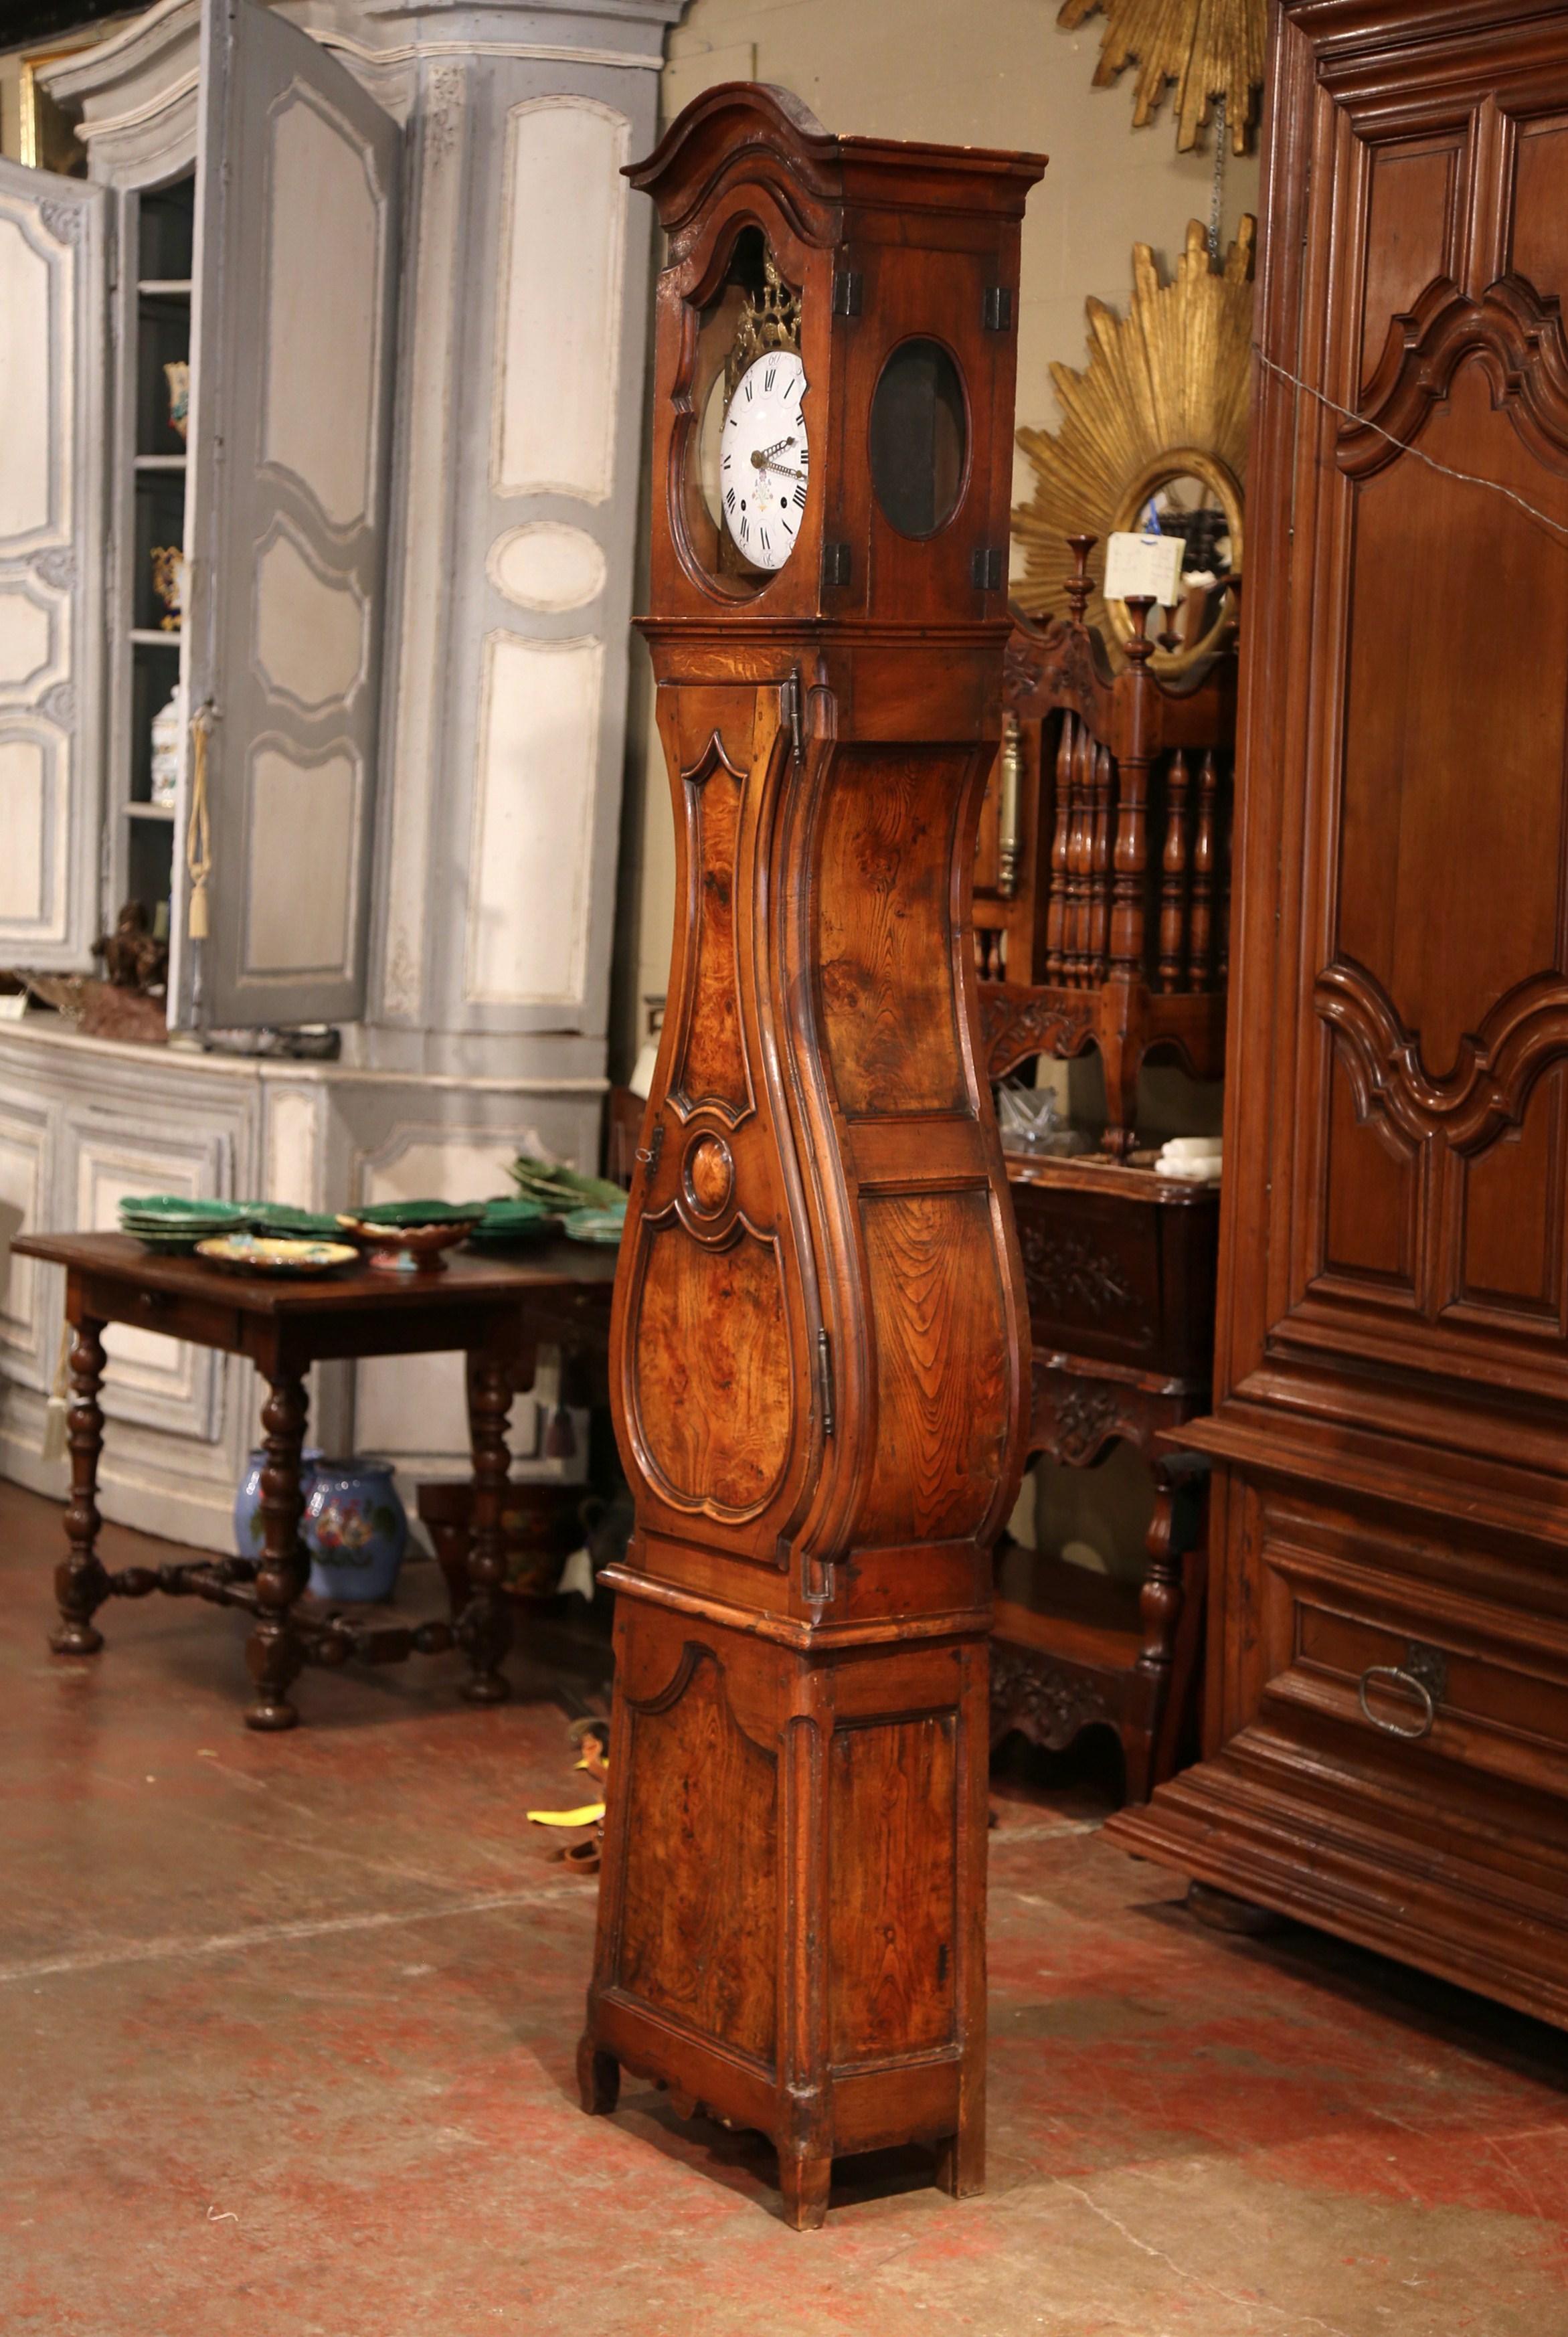 Hand-Carved Late 18th Century French Louis XV Carved Burl Walnut Tall Case Clock from Lyon